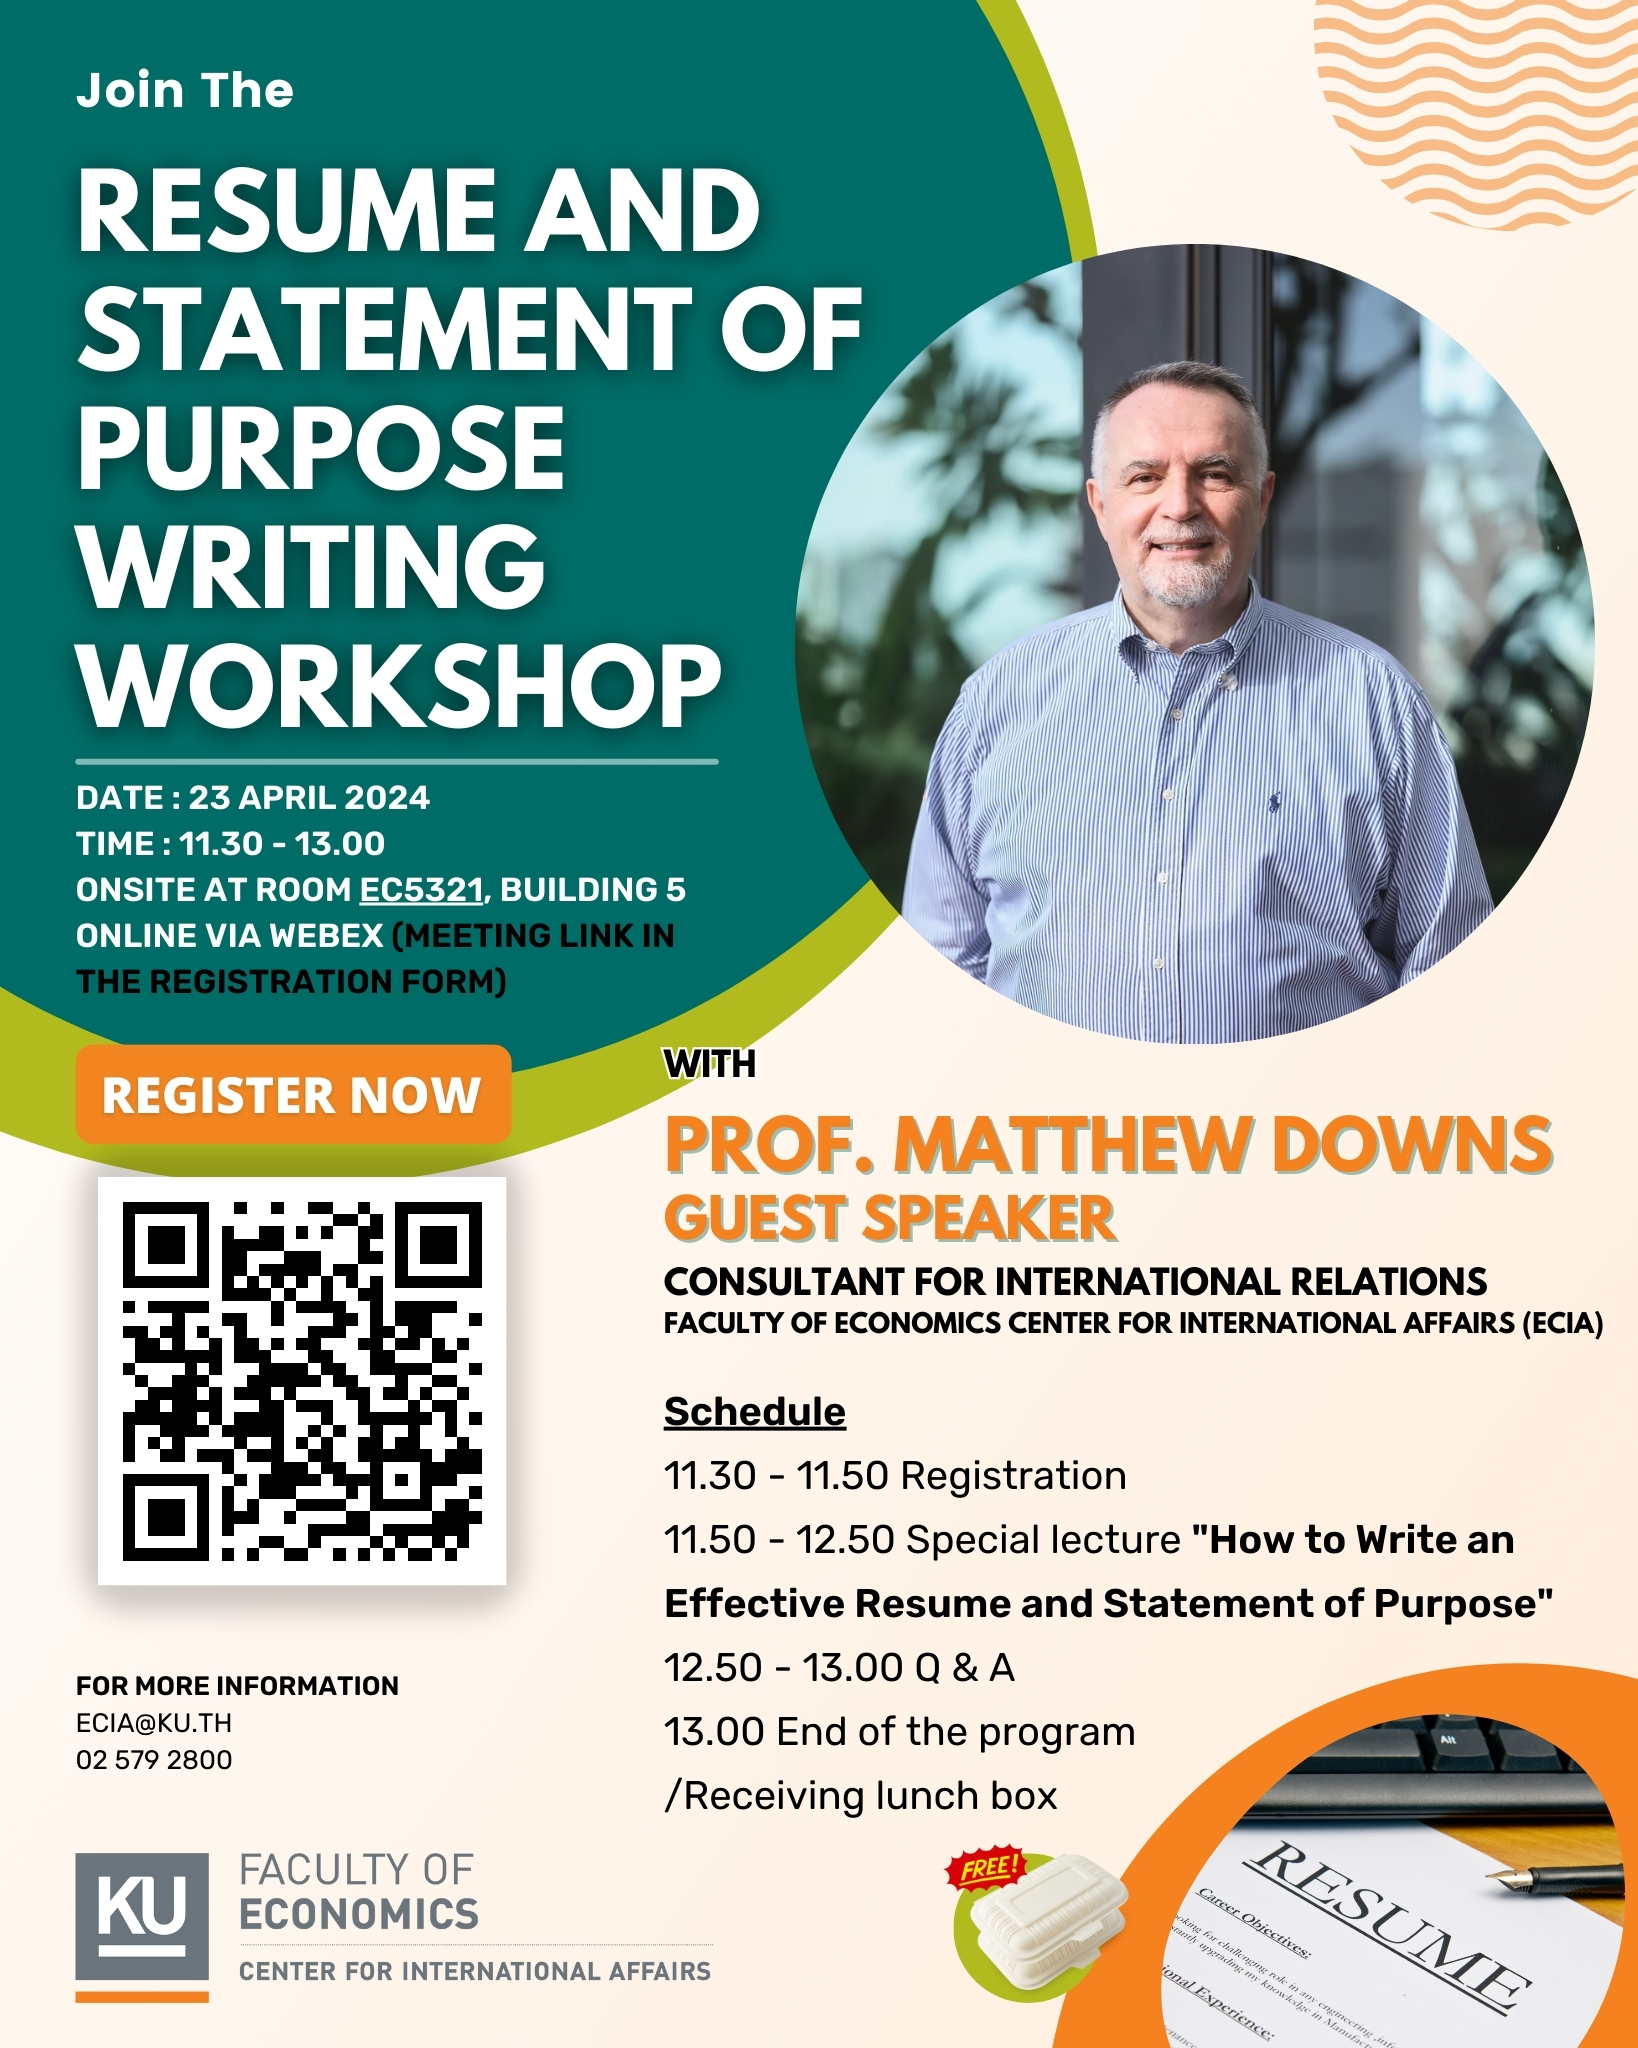 “Resume and Statement of Purpose Writing Workshop” on 23 April 2024